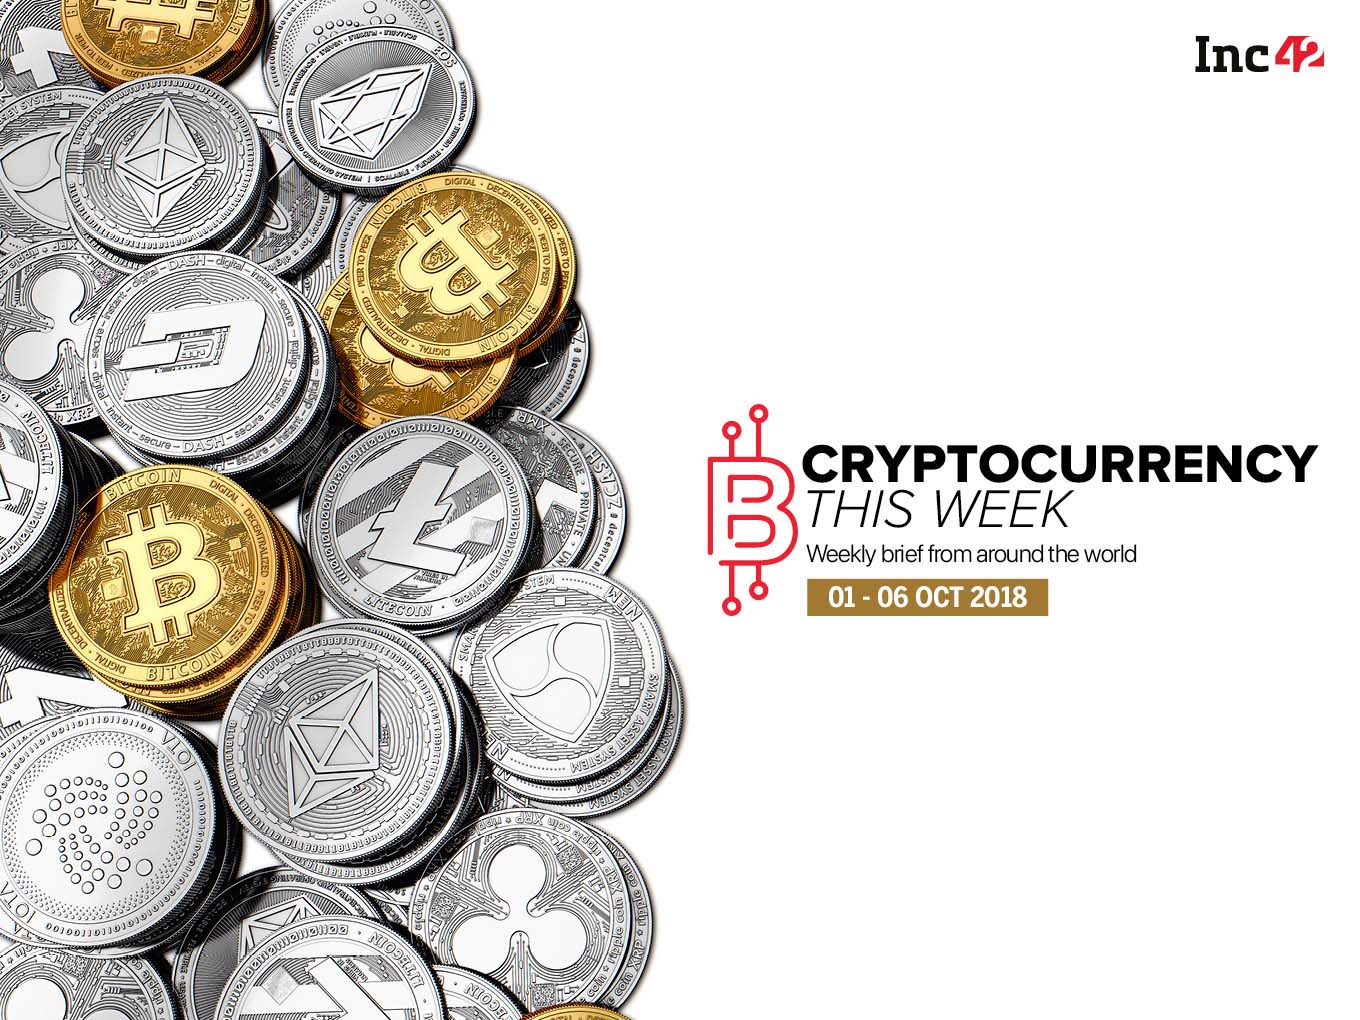 cryptocurrency-this-week-unregulated-crypto-exchanges-handle-97-of-criminal-bitcoin-flow-unocoin-to-launch-crypto-atm-and-more